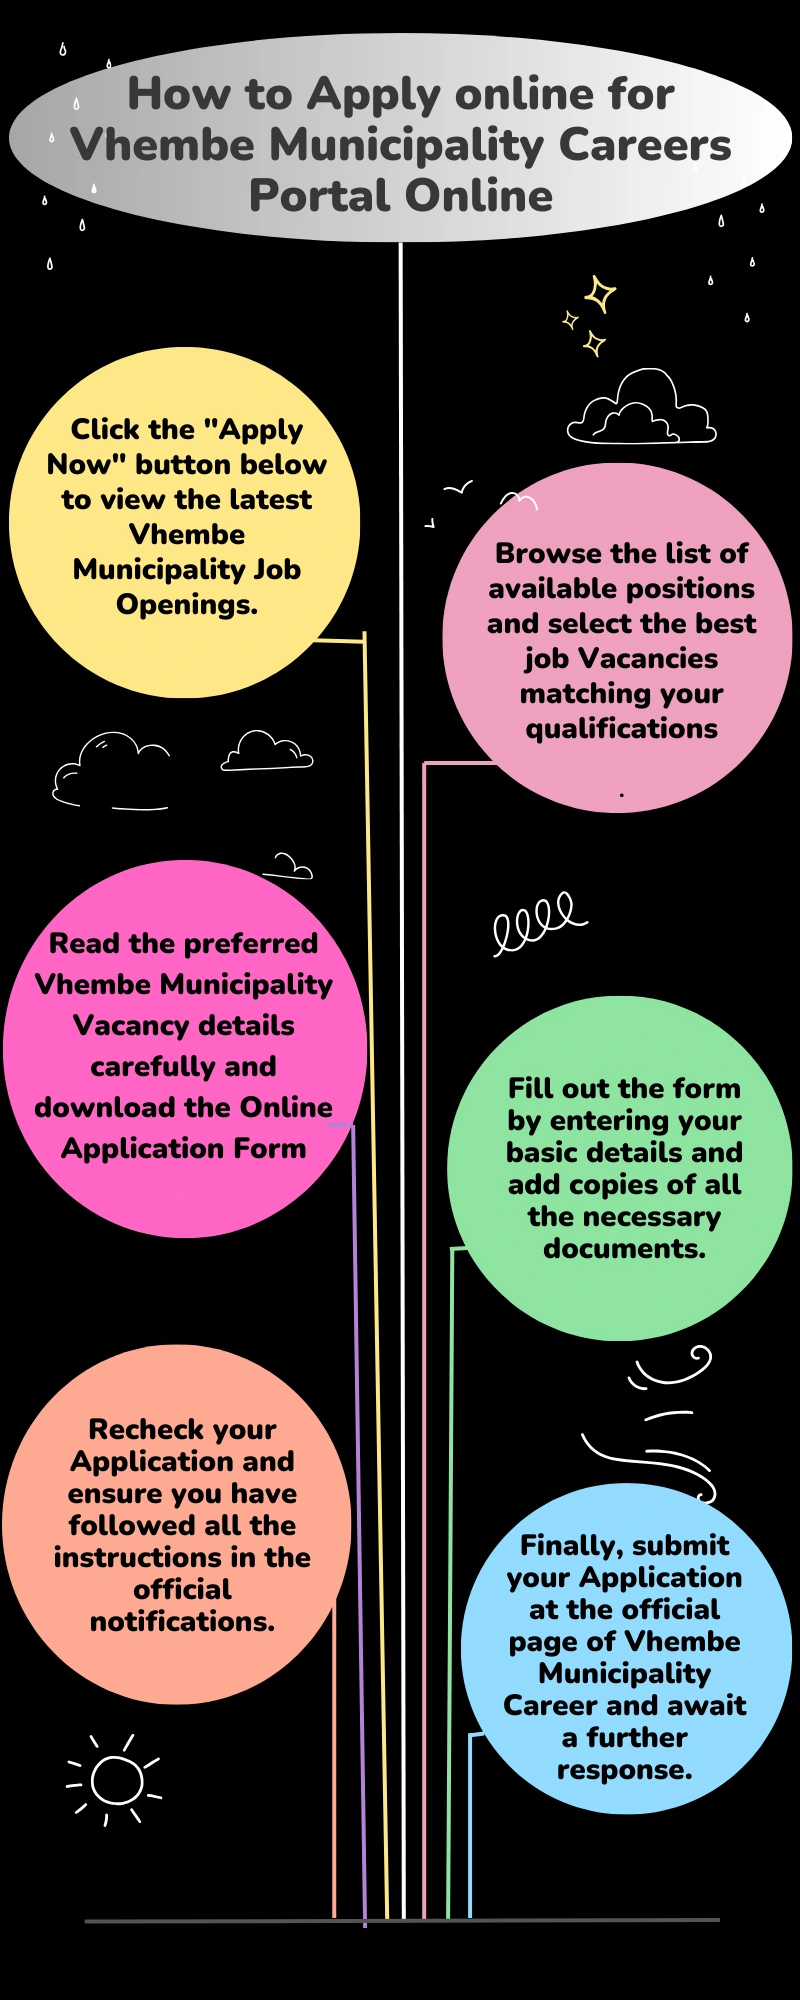 How to Apply online for Vhembe Municipality Careers Portal Online